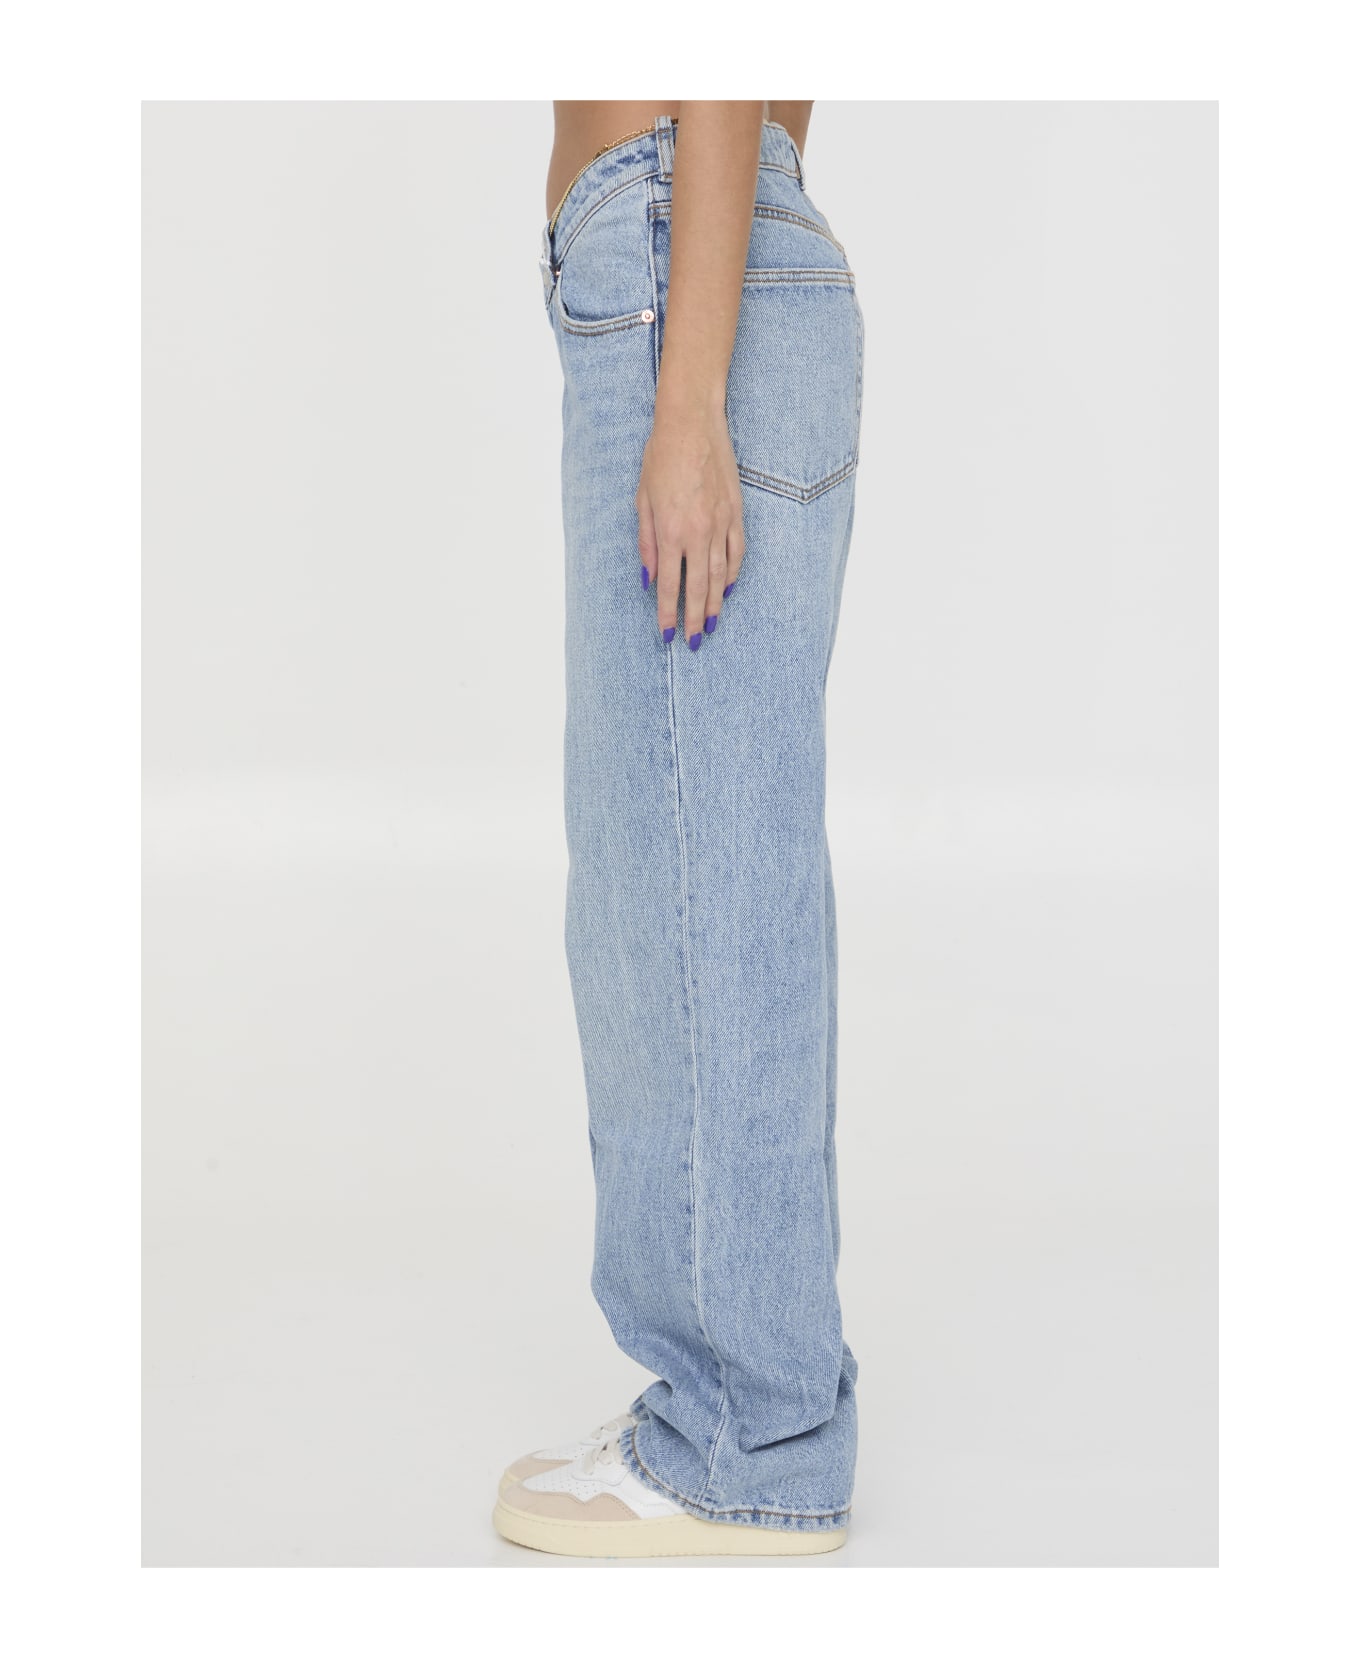 Alexander Wang Denim Jeans With Nameplate - BLUE